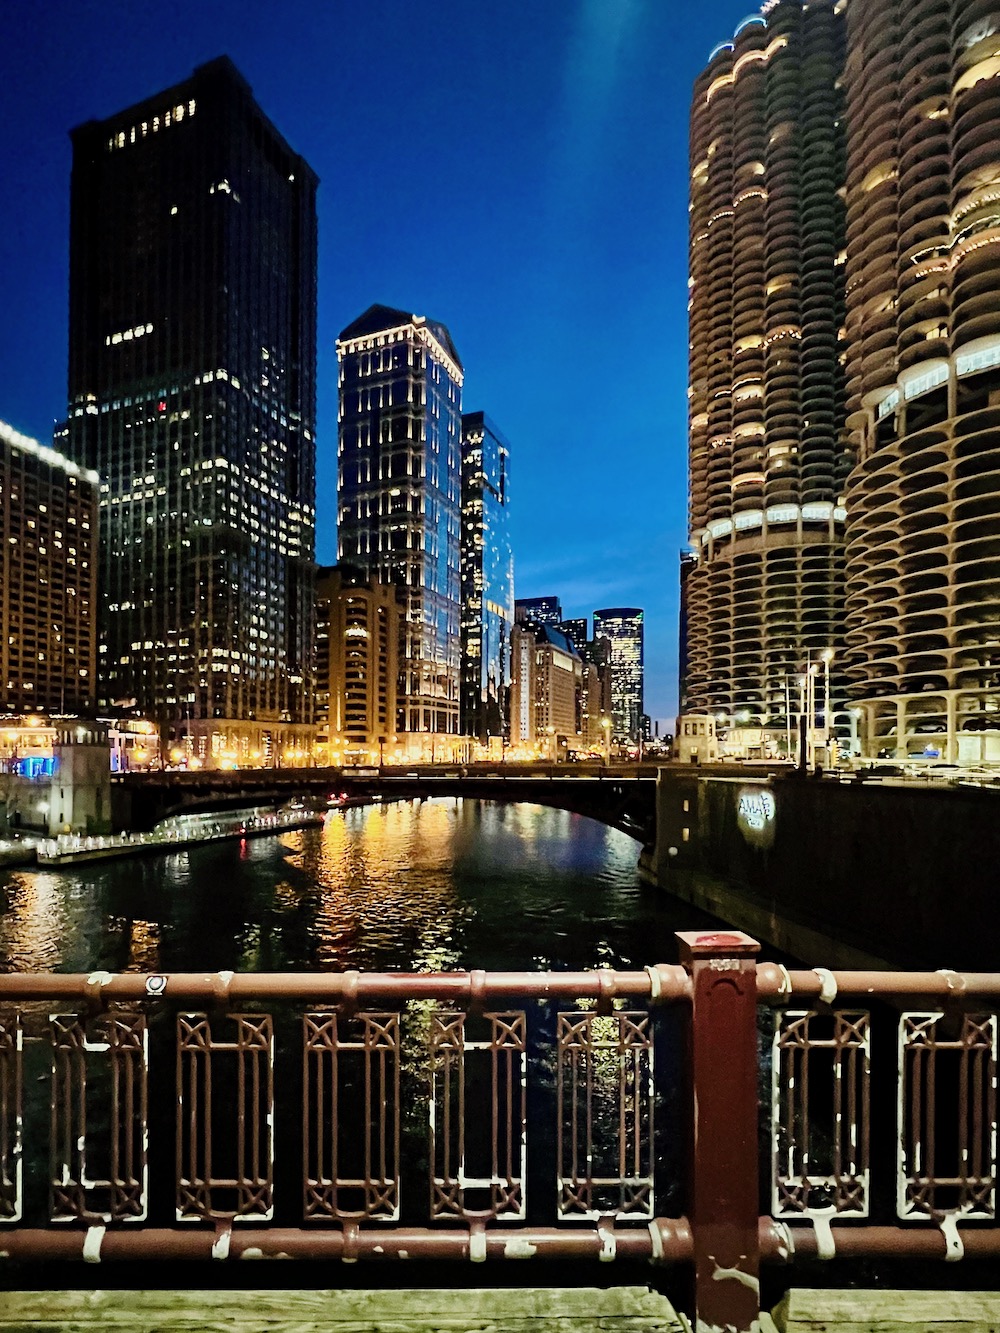 The Chicago River at Night April 2022